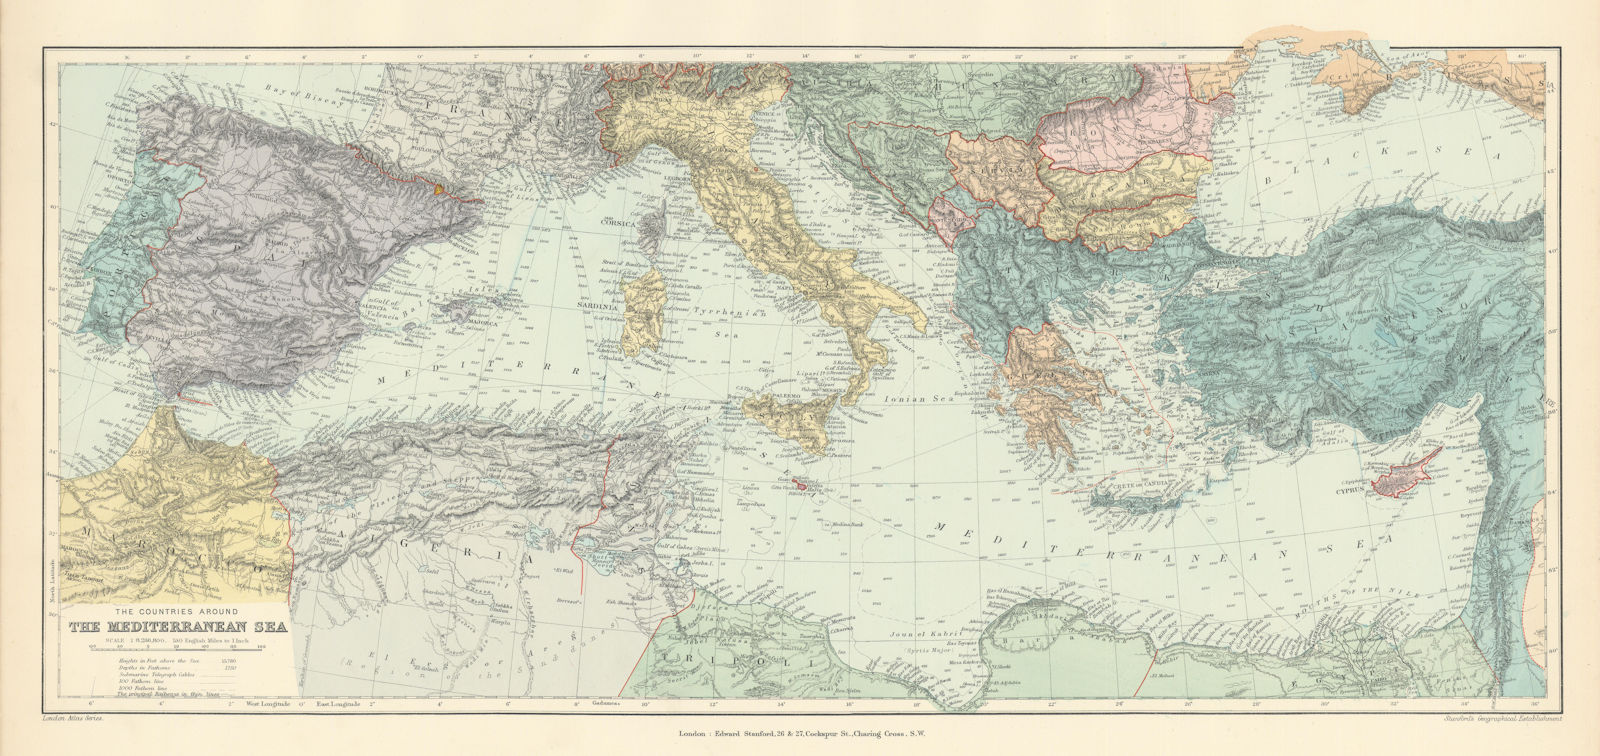 Associate Product Countries round the Mediterranean. Soundings Telegraph cables. STANFORD 1896 map